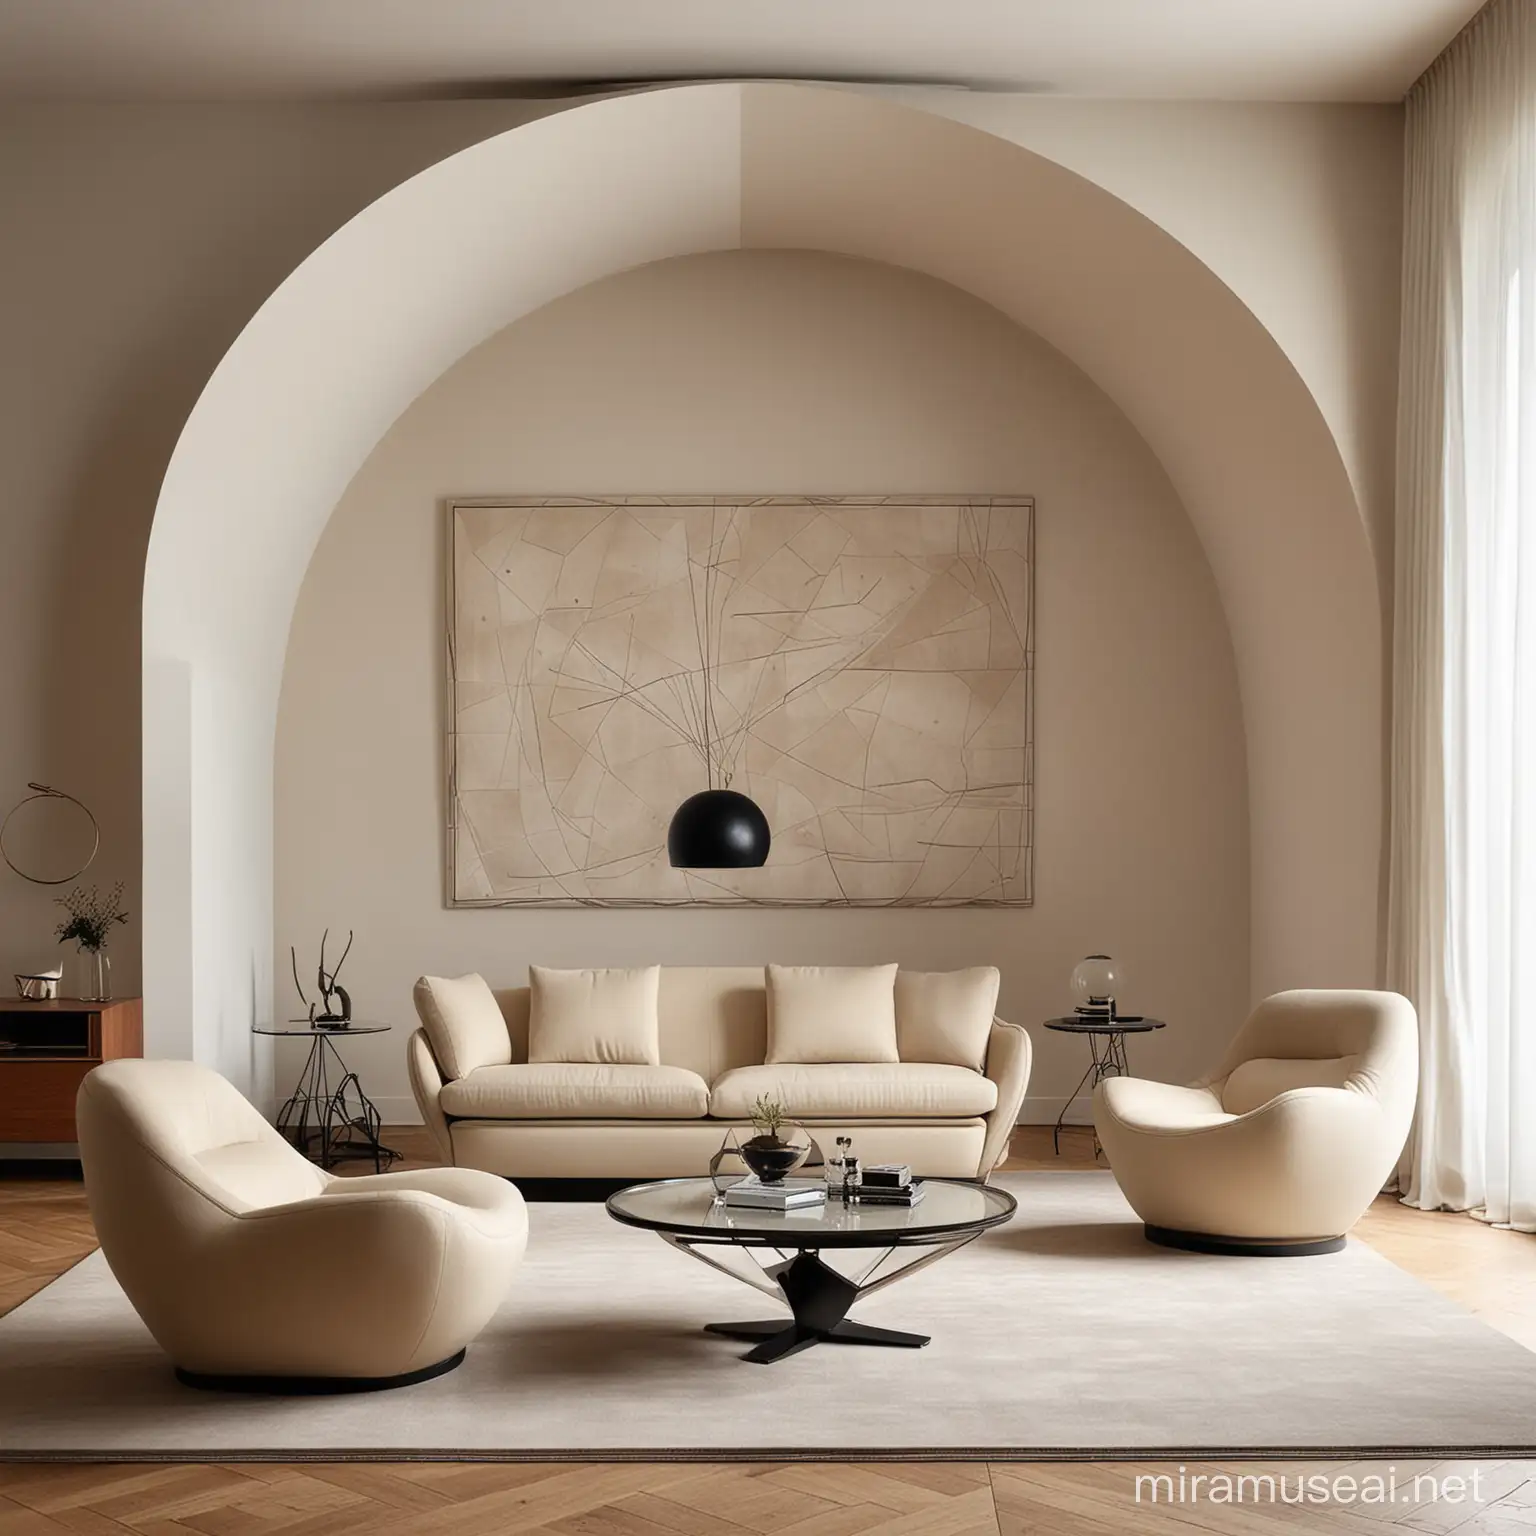 Modern Architectural Interior Design with Geometric Art Gallery Collection